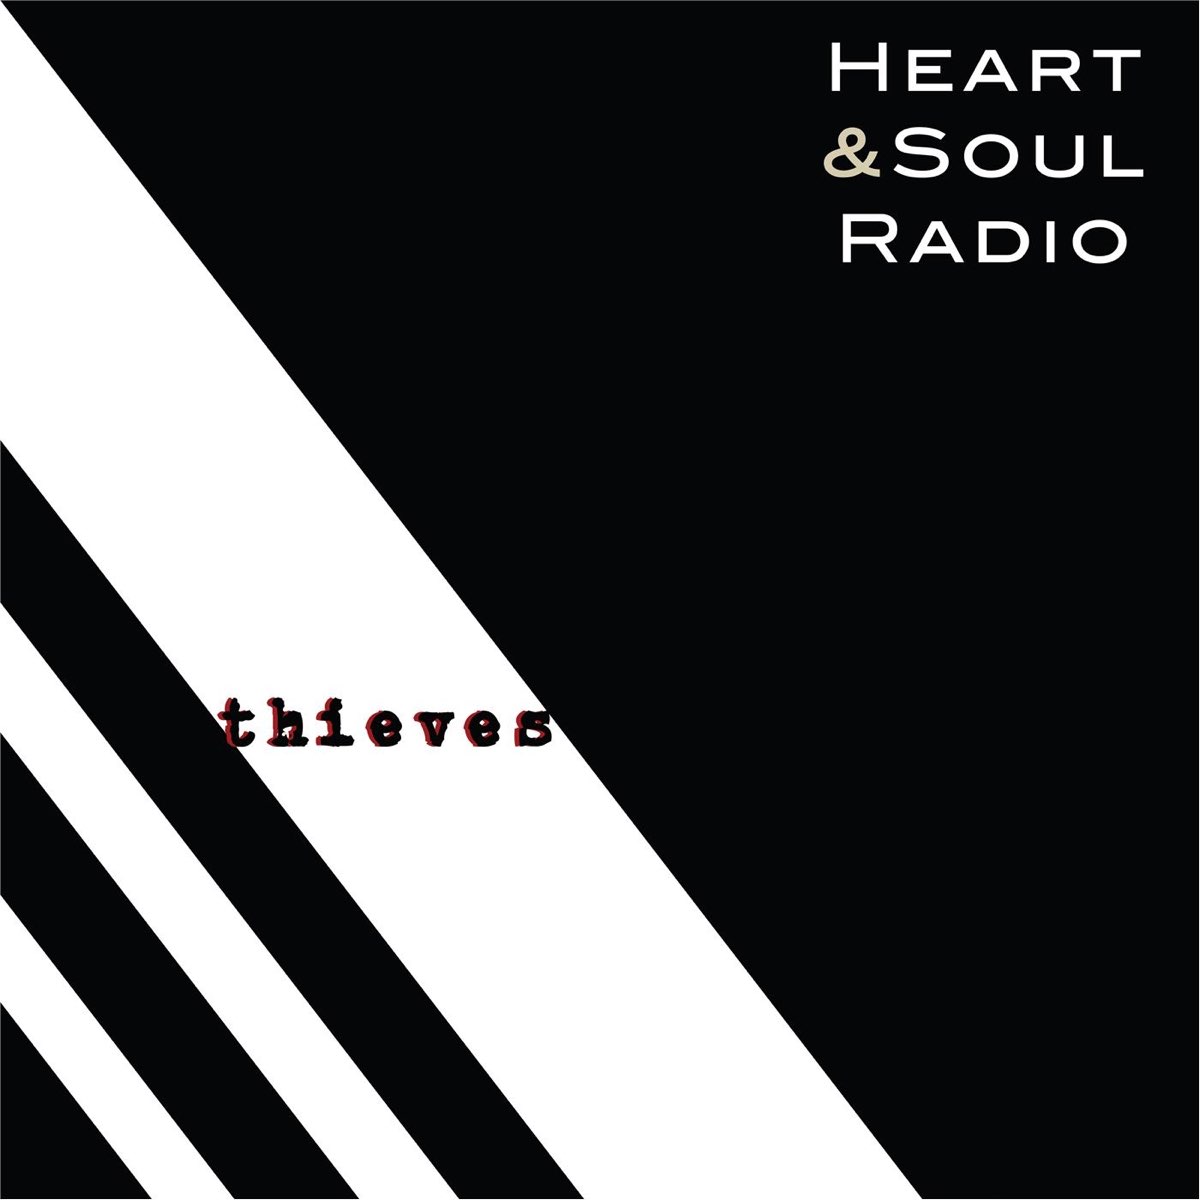 Loving heart soul. Heart and Soul. One Heart one Soul. Soul Radio Edit. Thieves of Hearts.